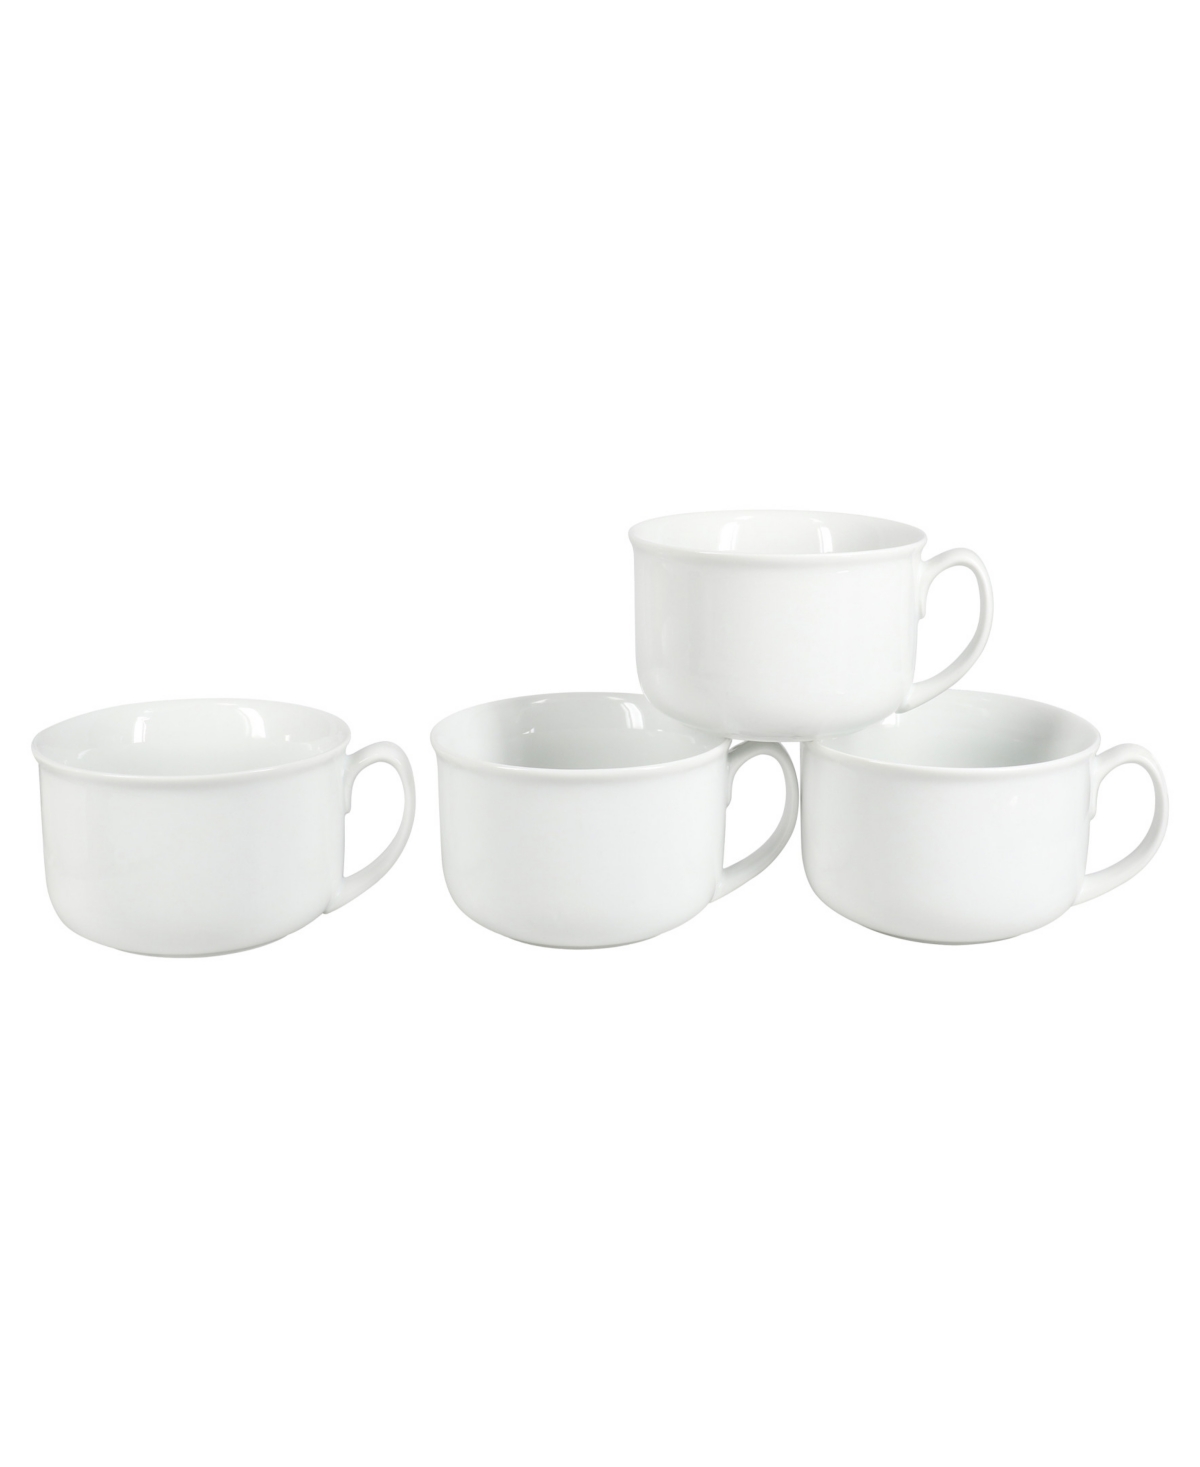 Handled Soup Bowls, Set of 4 - White